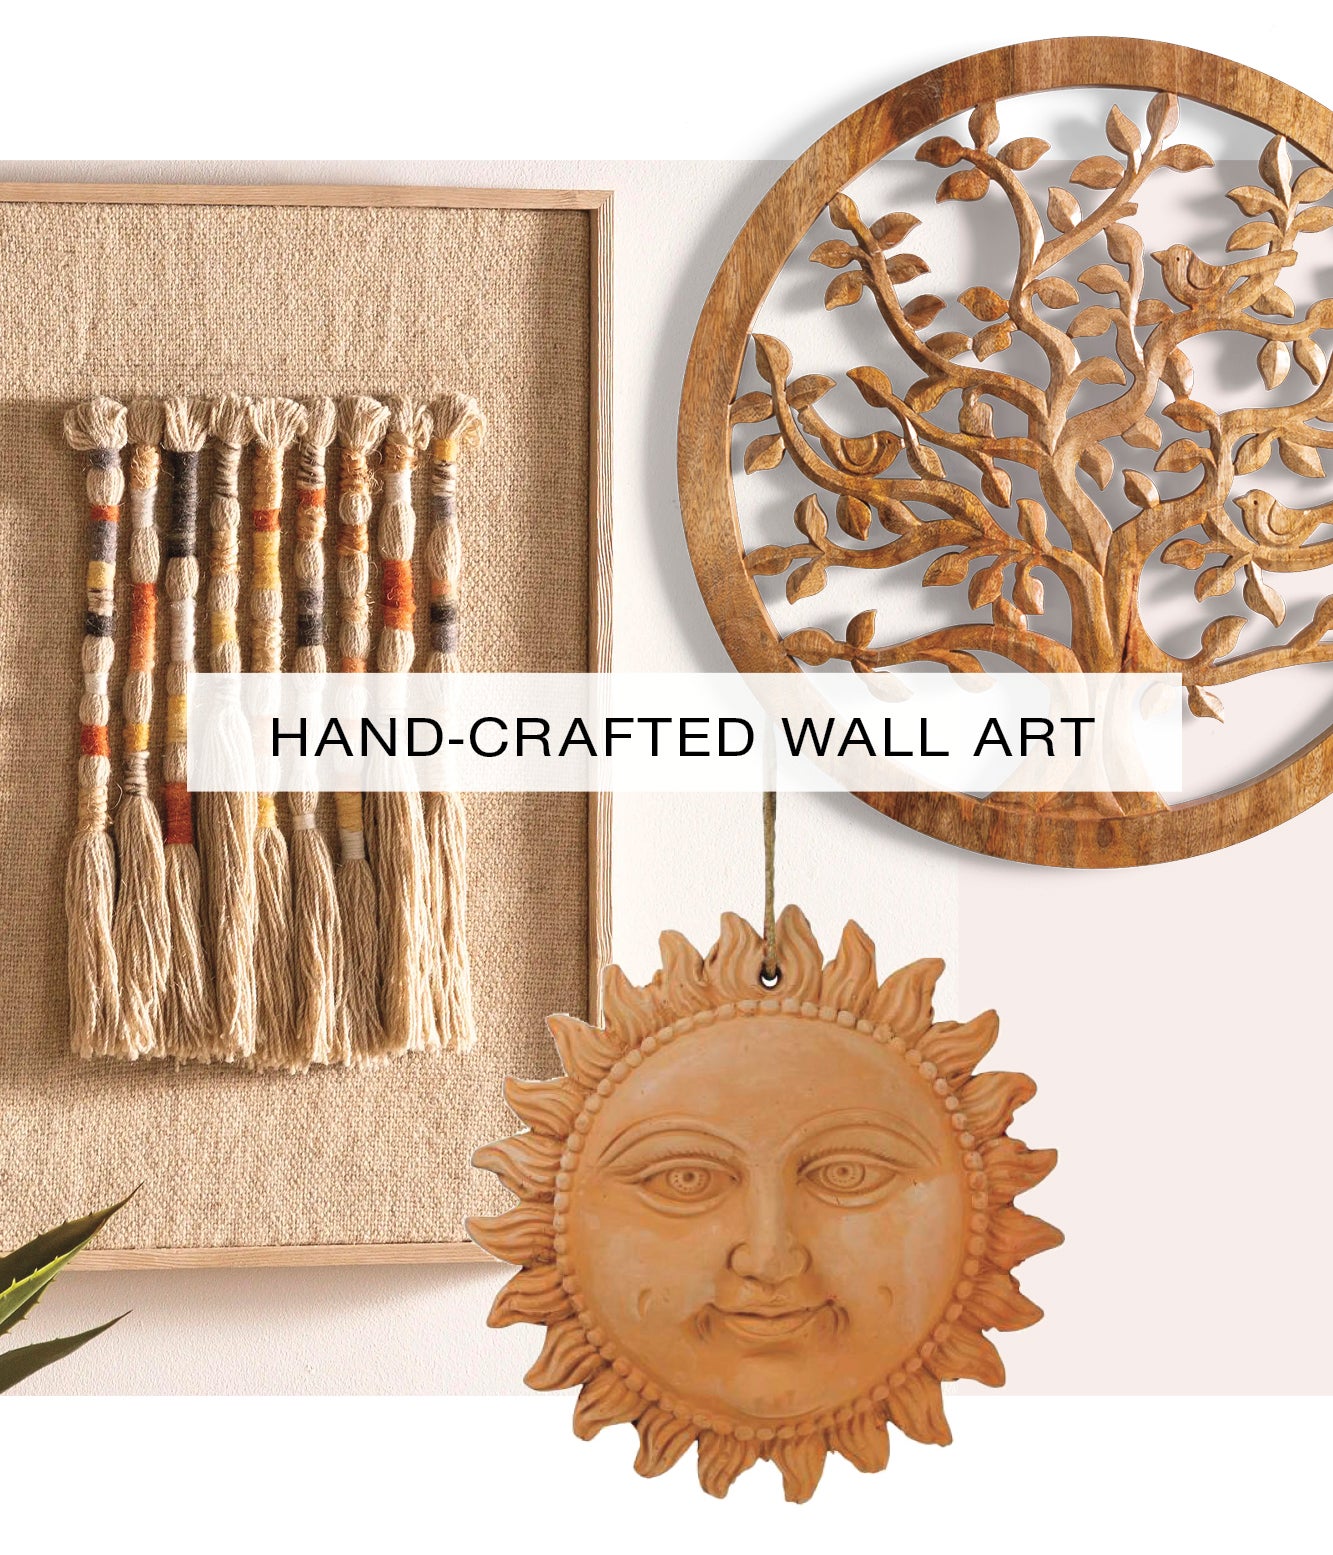 HAND-CRAFTED WALL ART